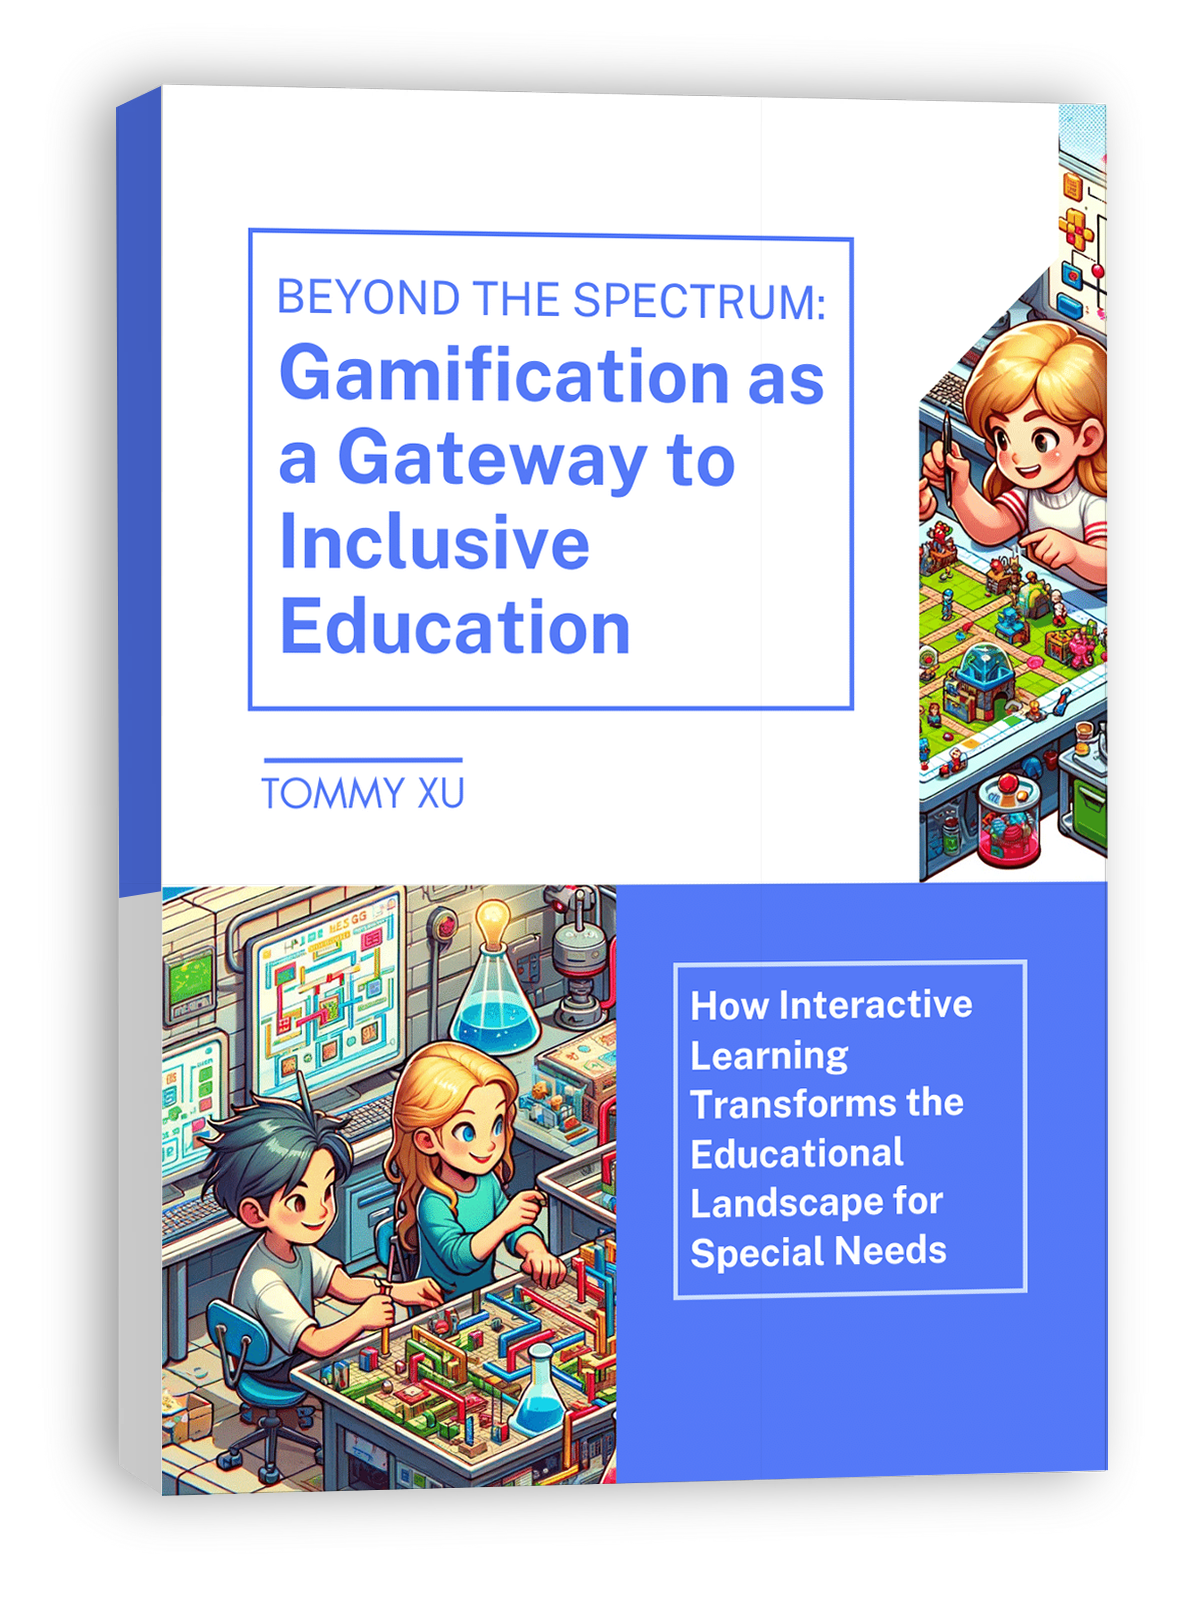 Beyond the Spectrum: Gamification as a Gateway to Inclusive Education